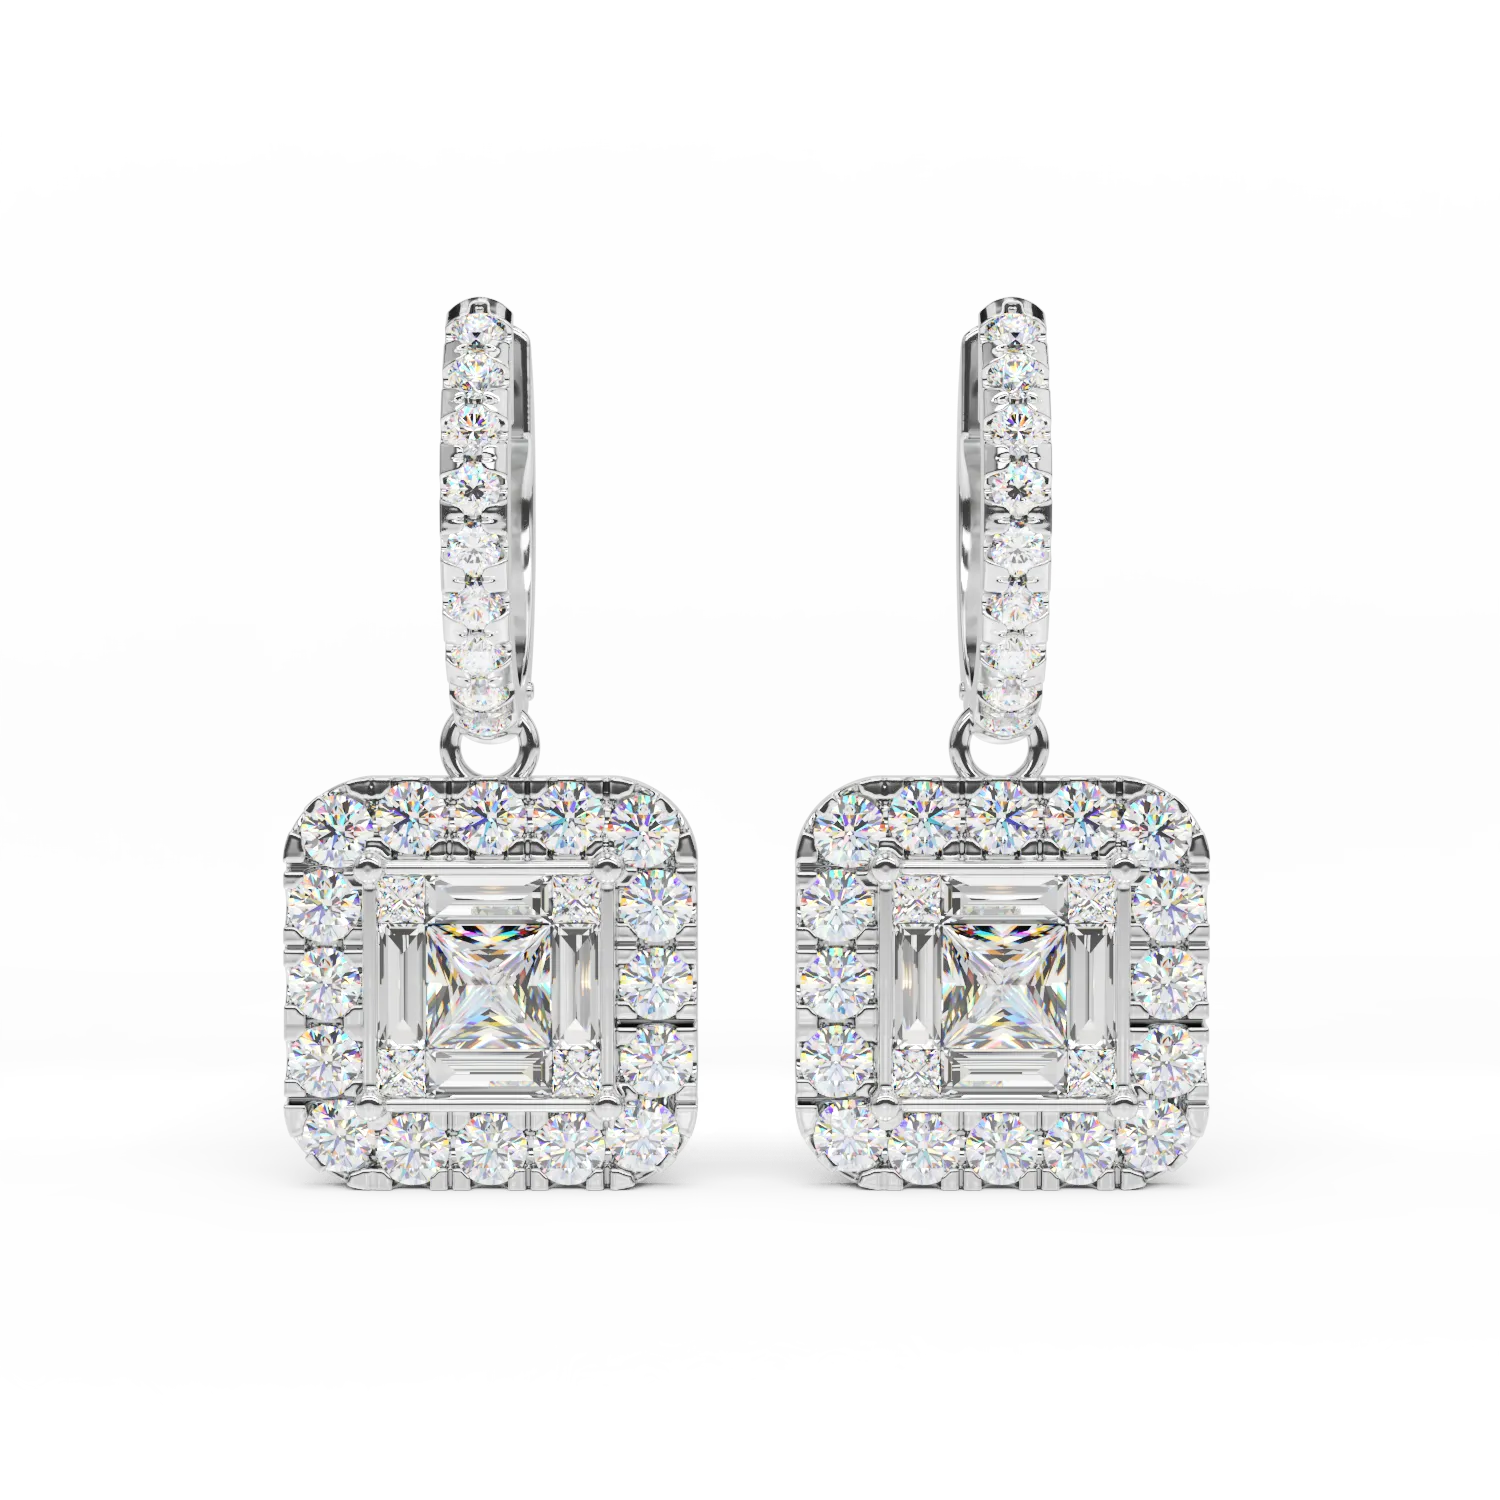 18K white gold earrings with 1.35ct diamonds